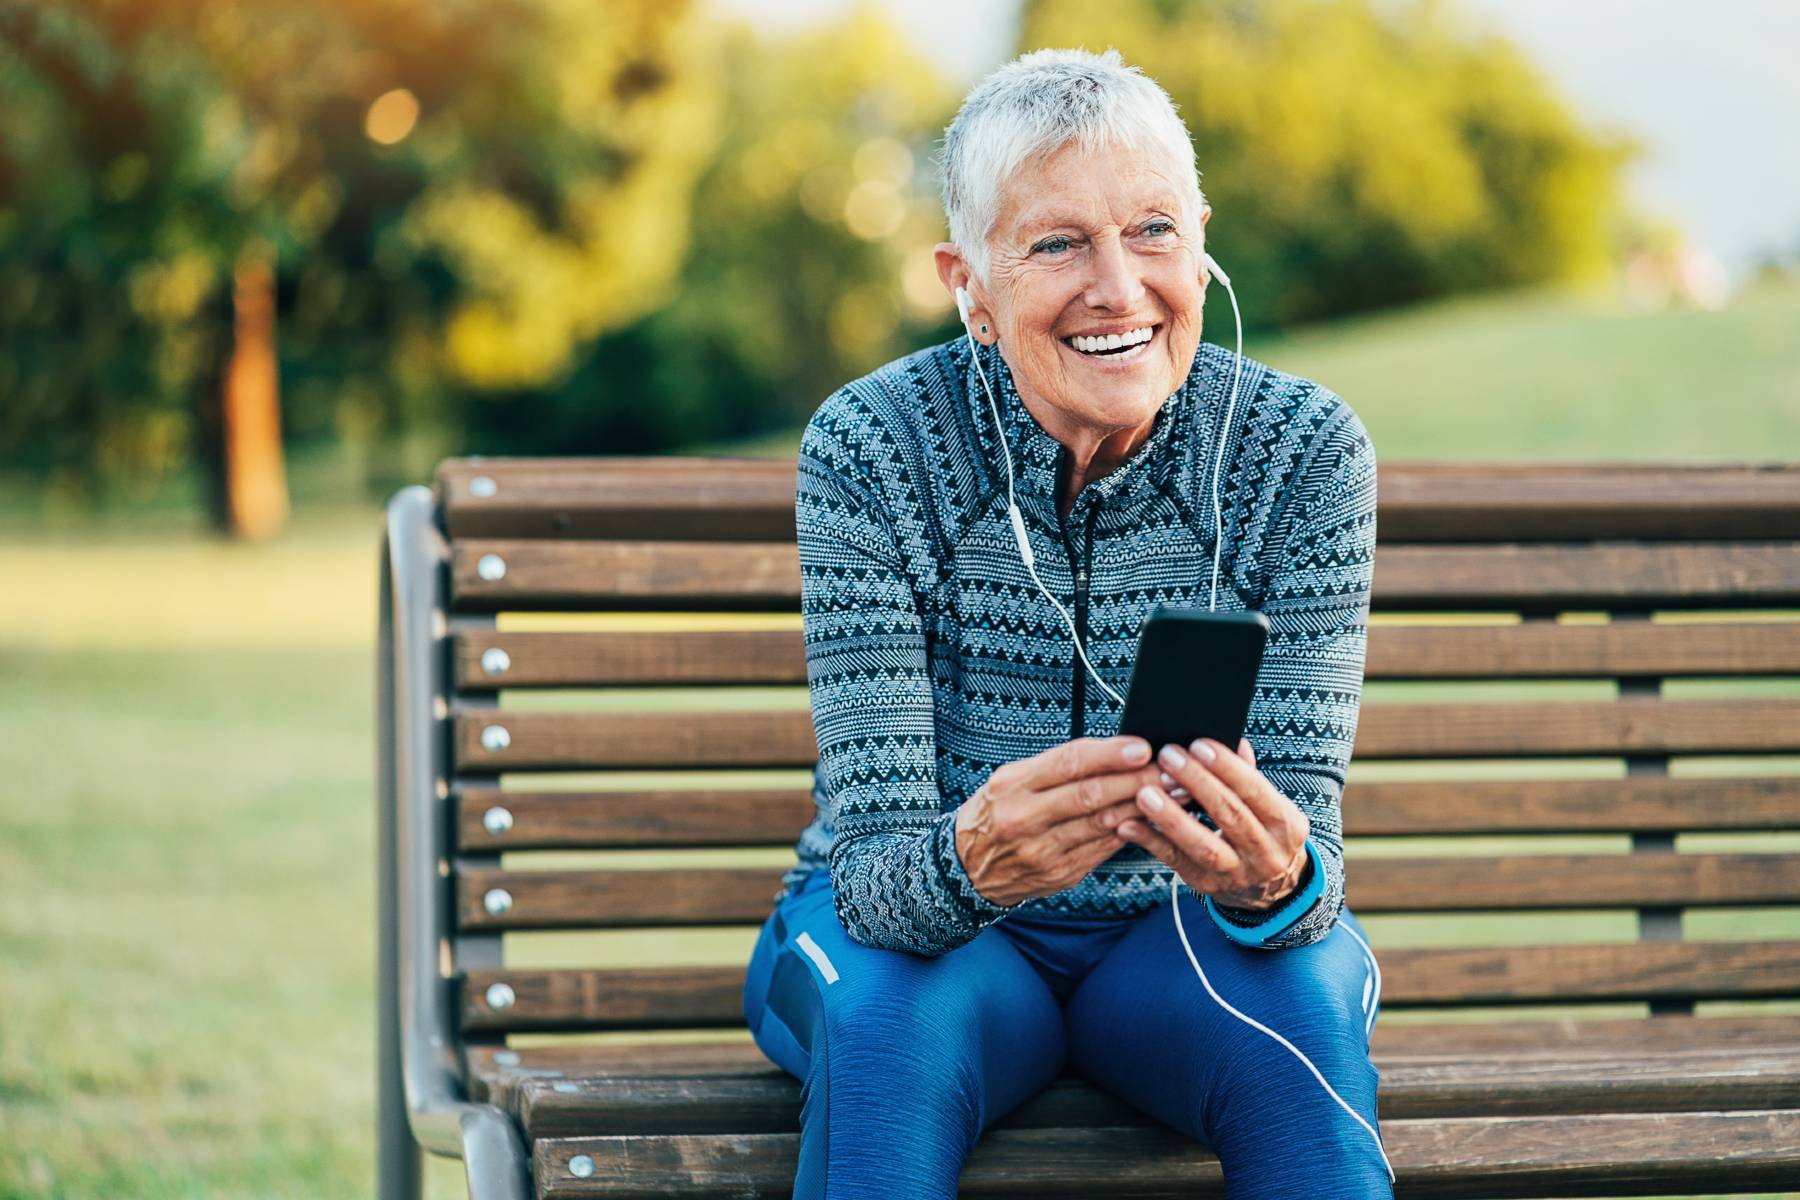 A senior woman in athletic gear stops her run and sits on a park bench to list to music on her phone